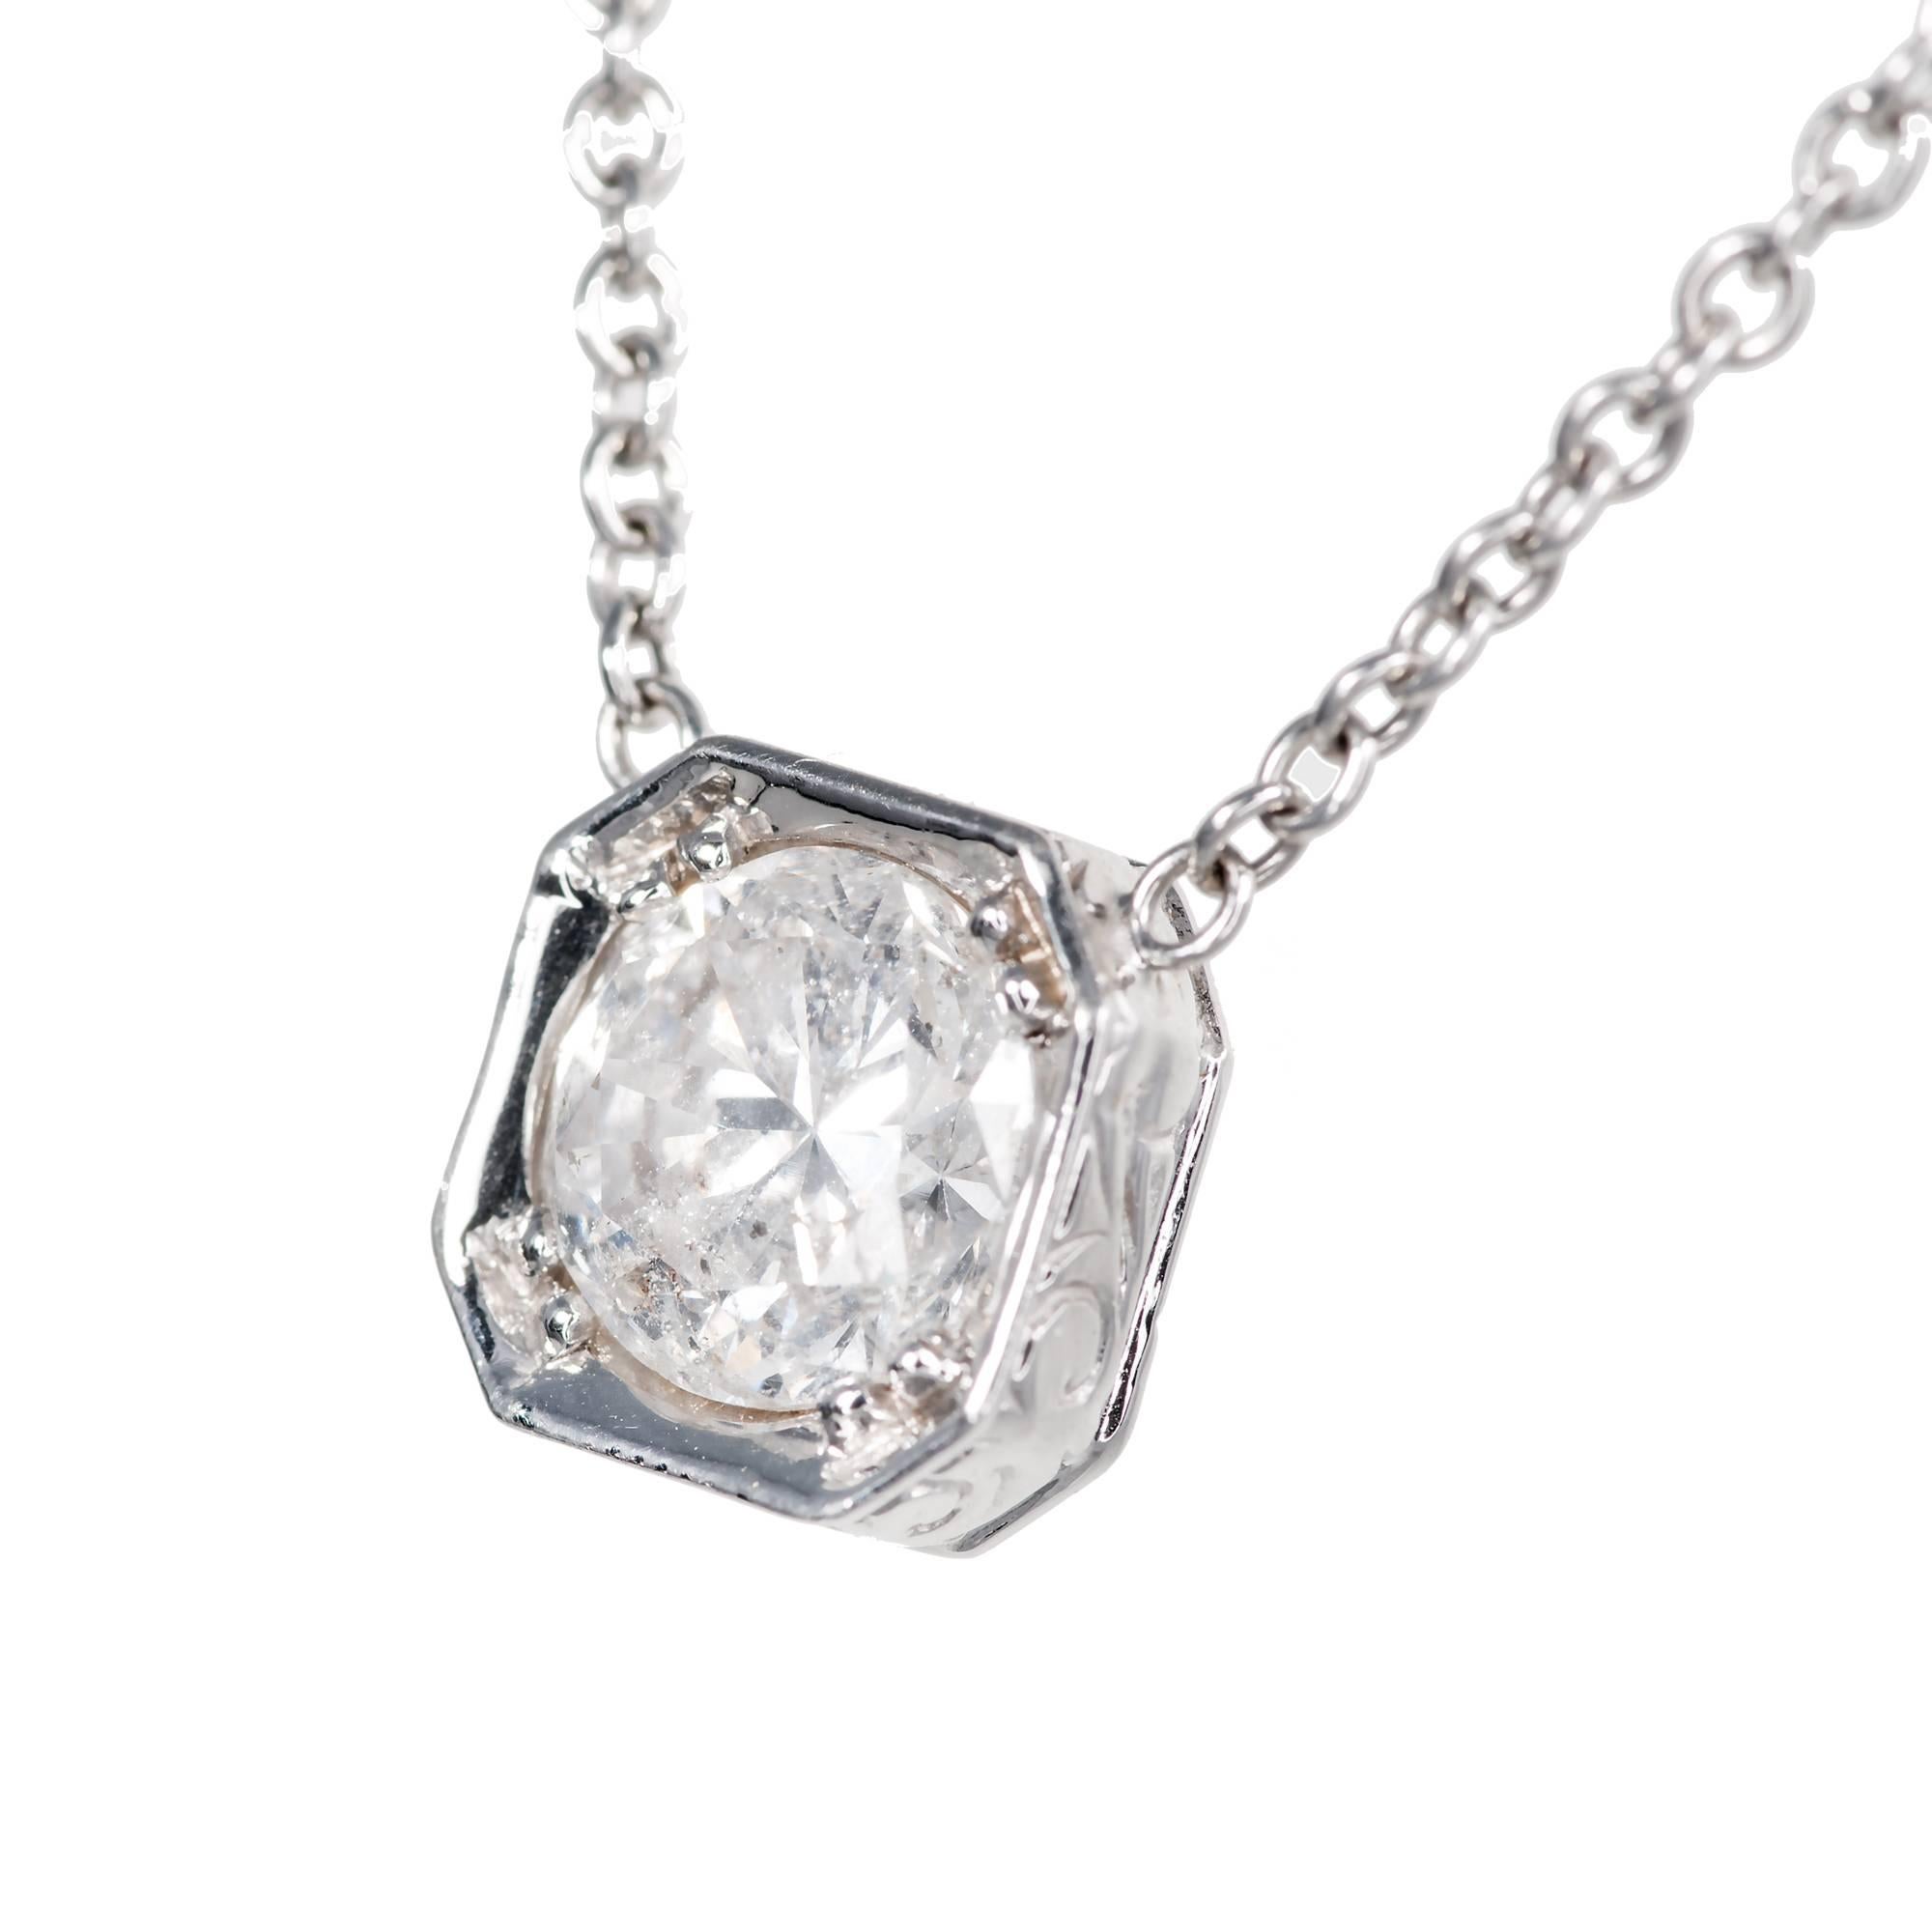 Peter Suchy transitional cut diamond 1.39ct white, bright and sparkly. Custom designed style pendant with bead setting and engraved sides on a simple chain.

1 round diamond, approx. total weight 1.39cts, H, I1, 7.05 x 6.93 x 4.36mm, mostly eye